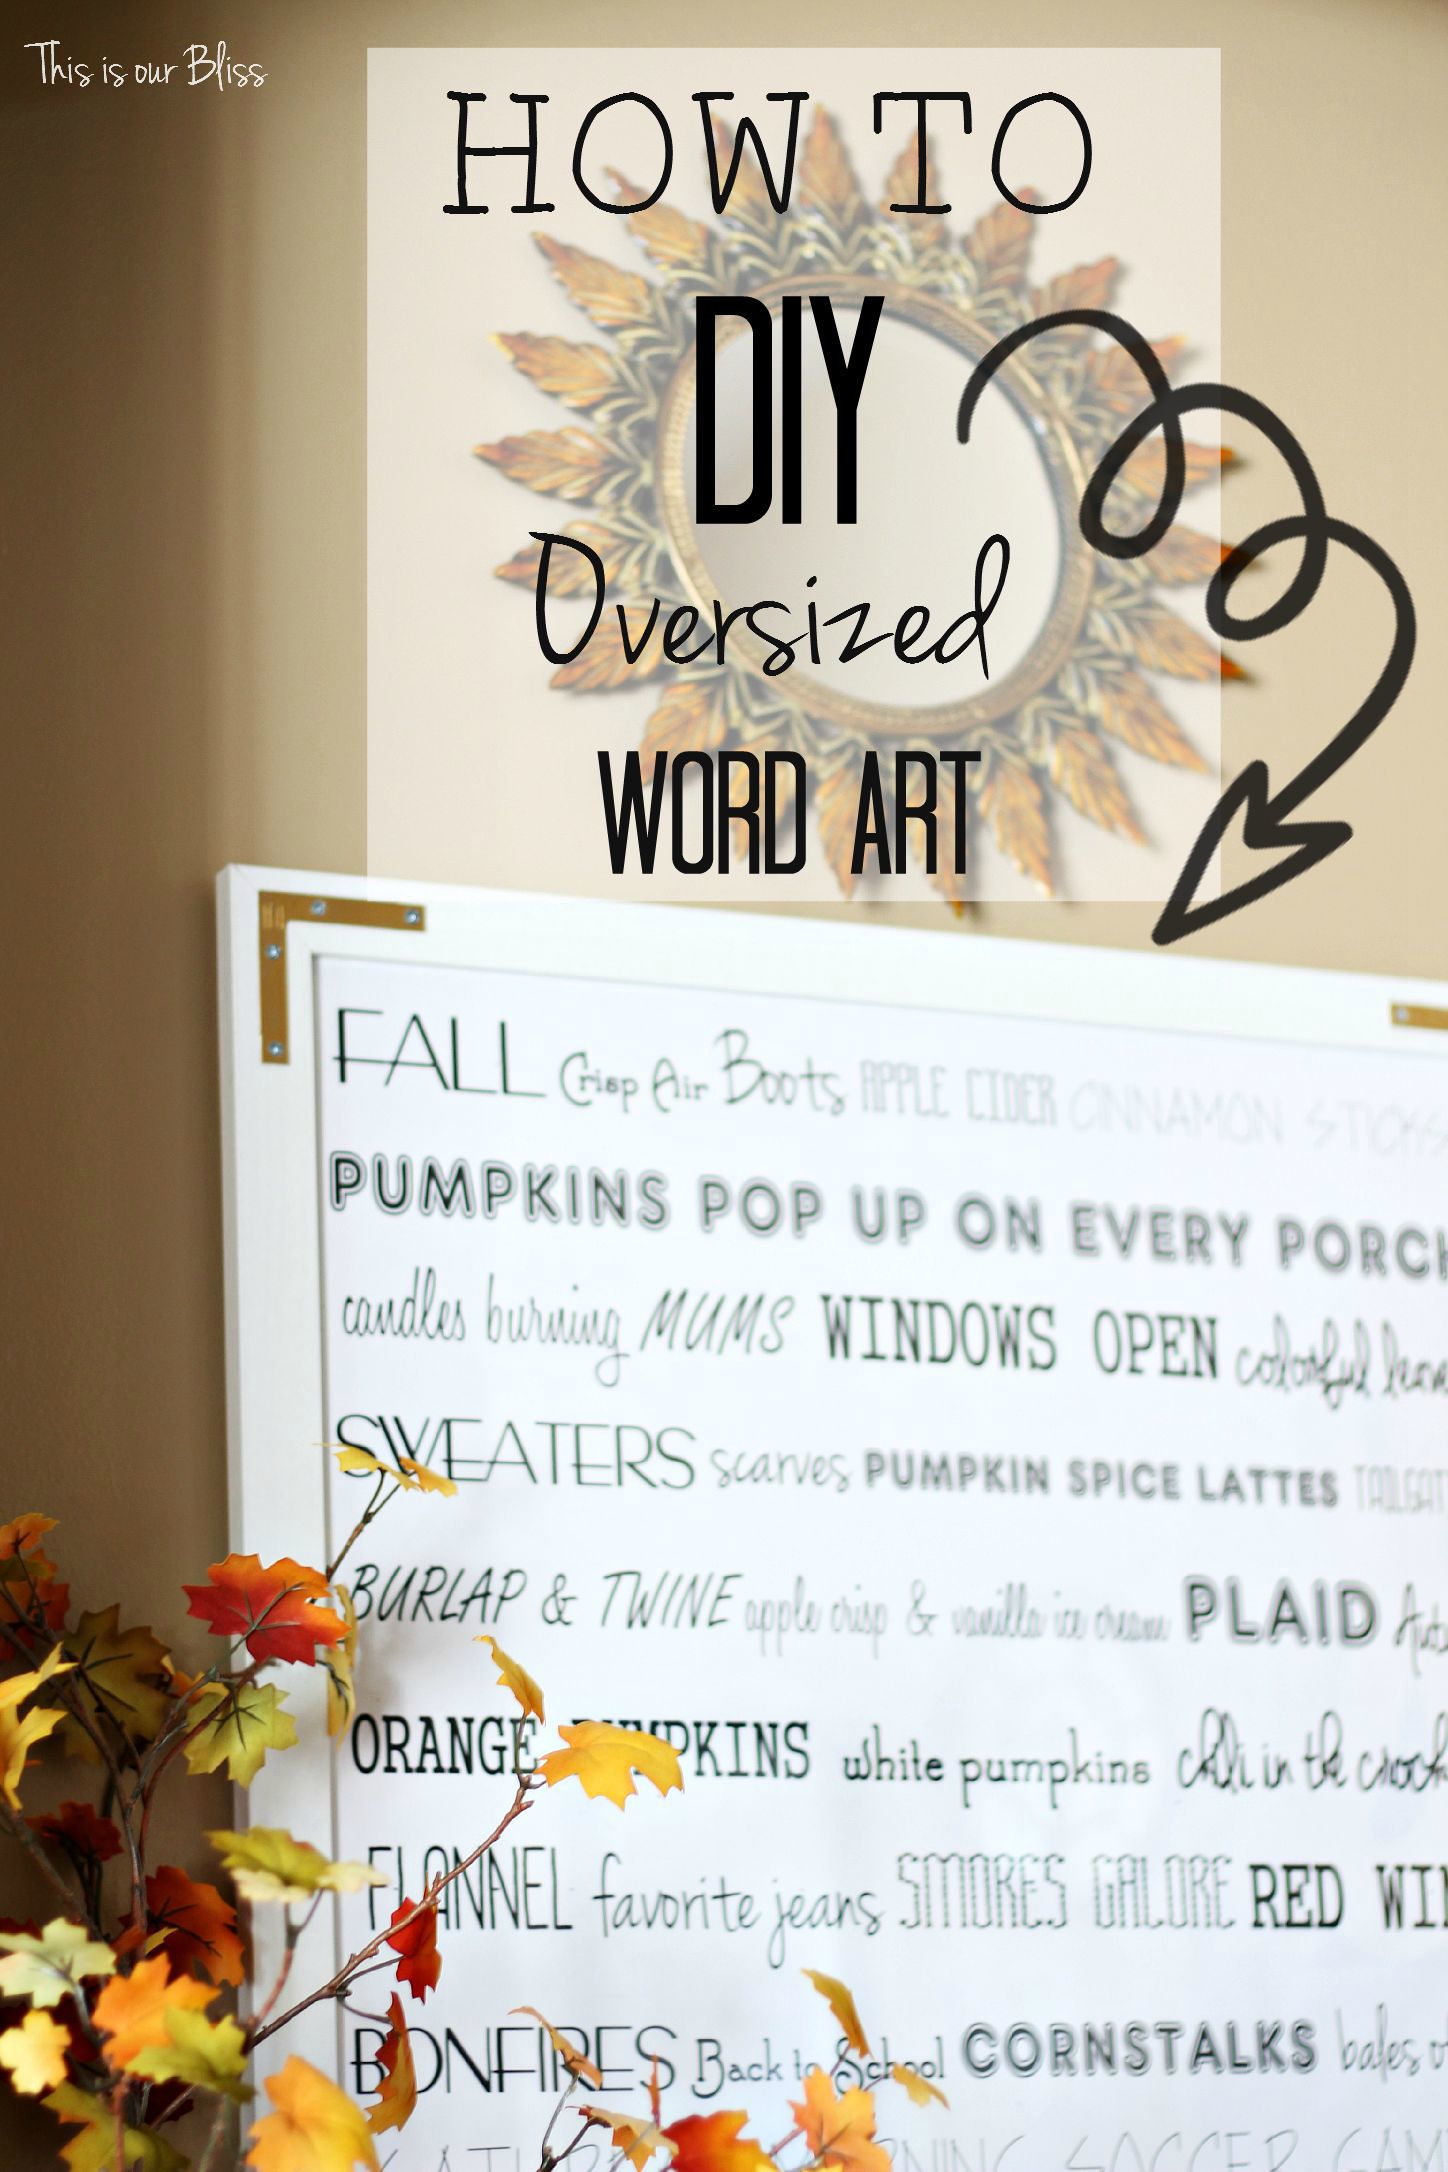 How to DIY oversized word ART -Fall entryway - fall vignette - DIY word art - fall decor - This is our Bliss